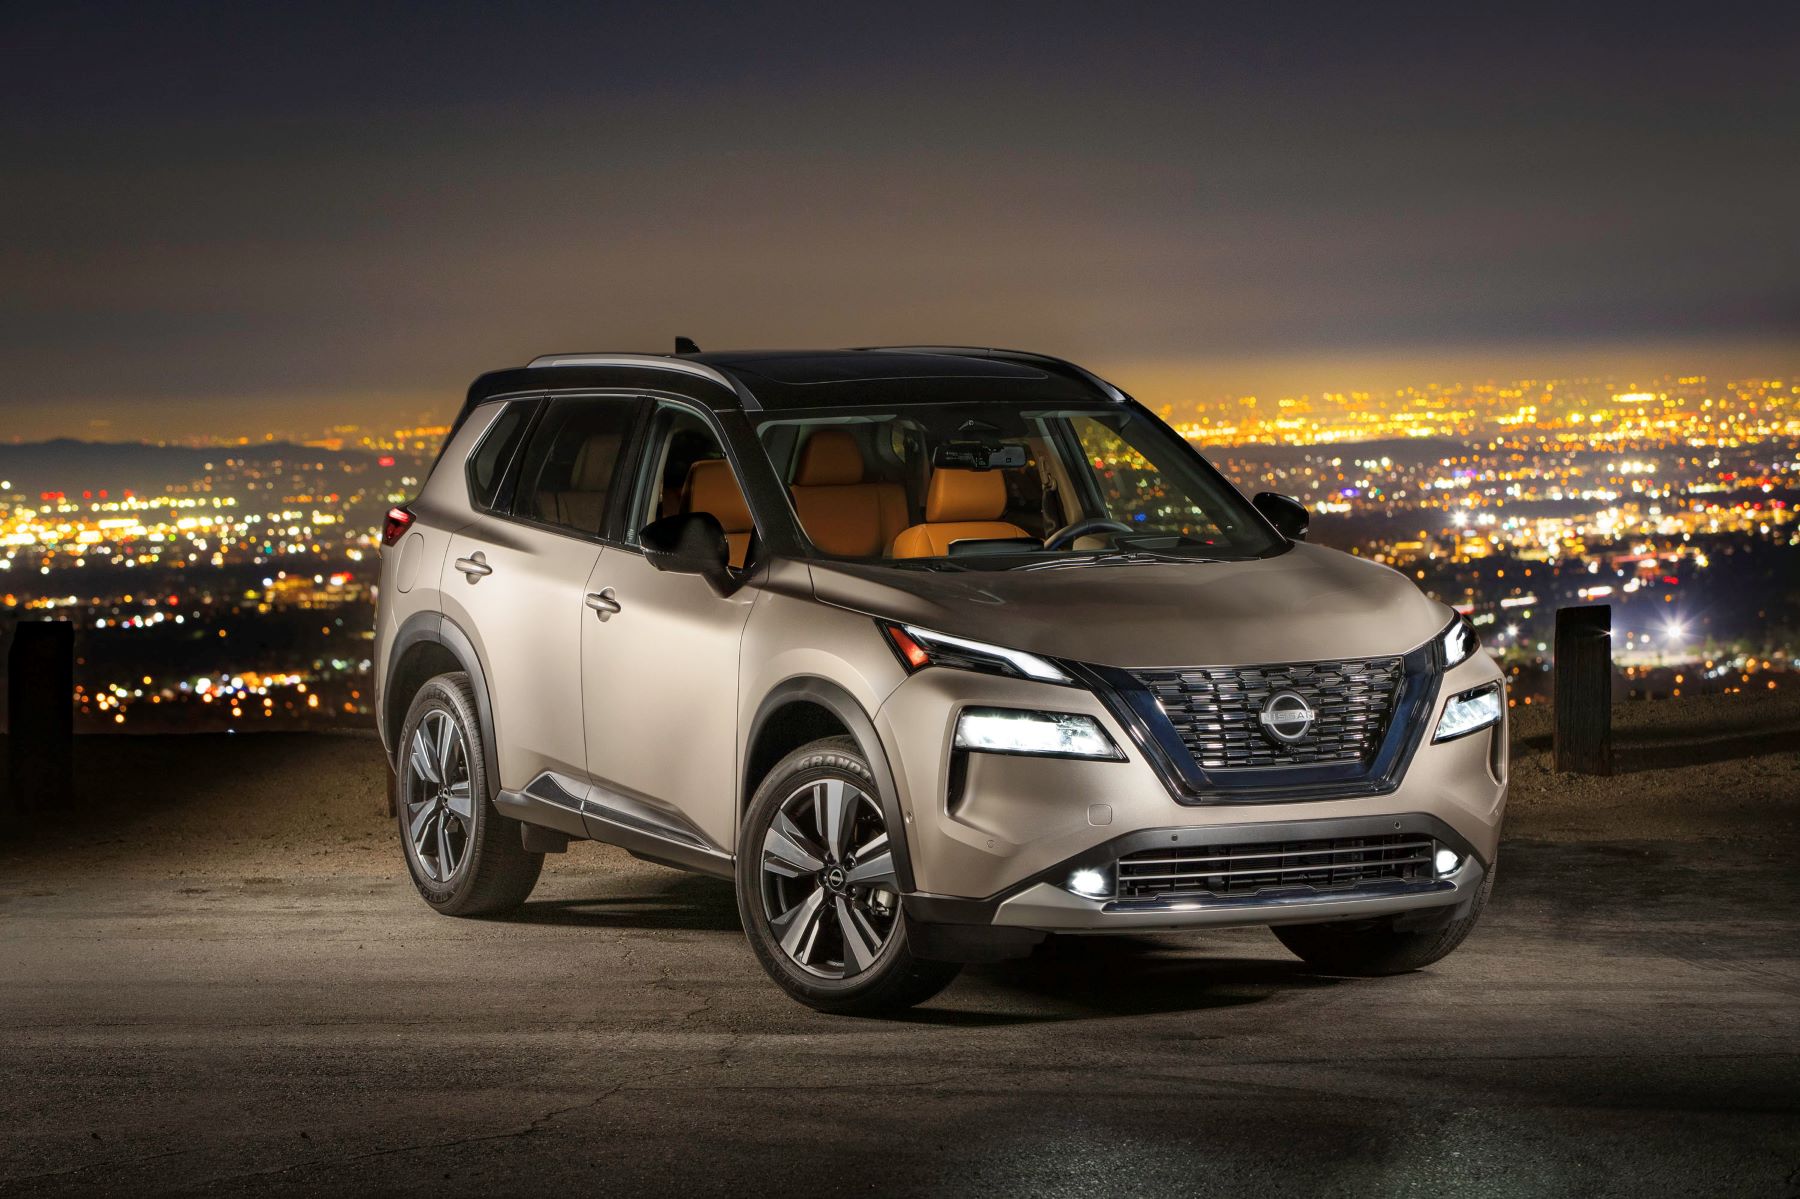 A bronze 2022 Nissan Rogue compact SUV model parked on a hill above a city of lights at night